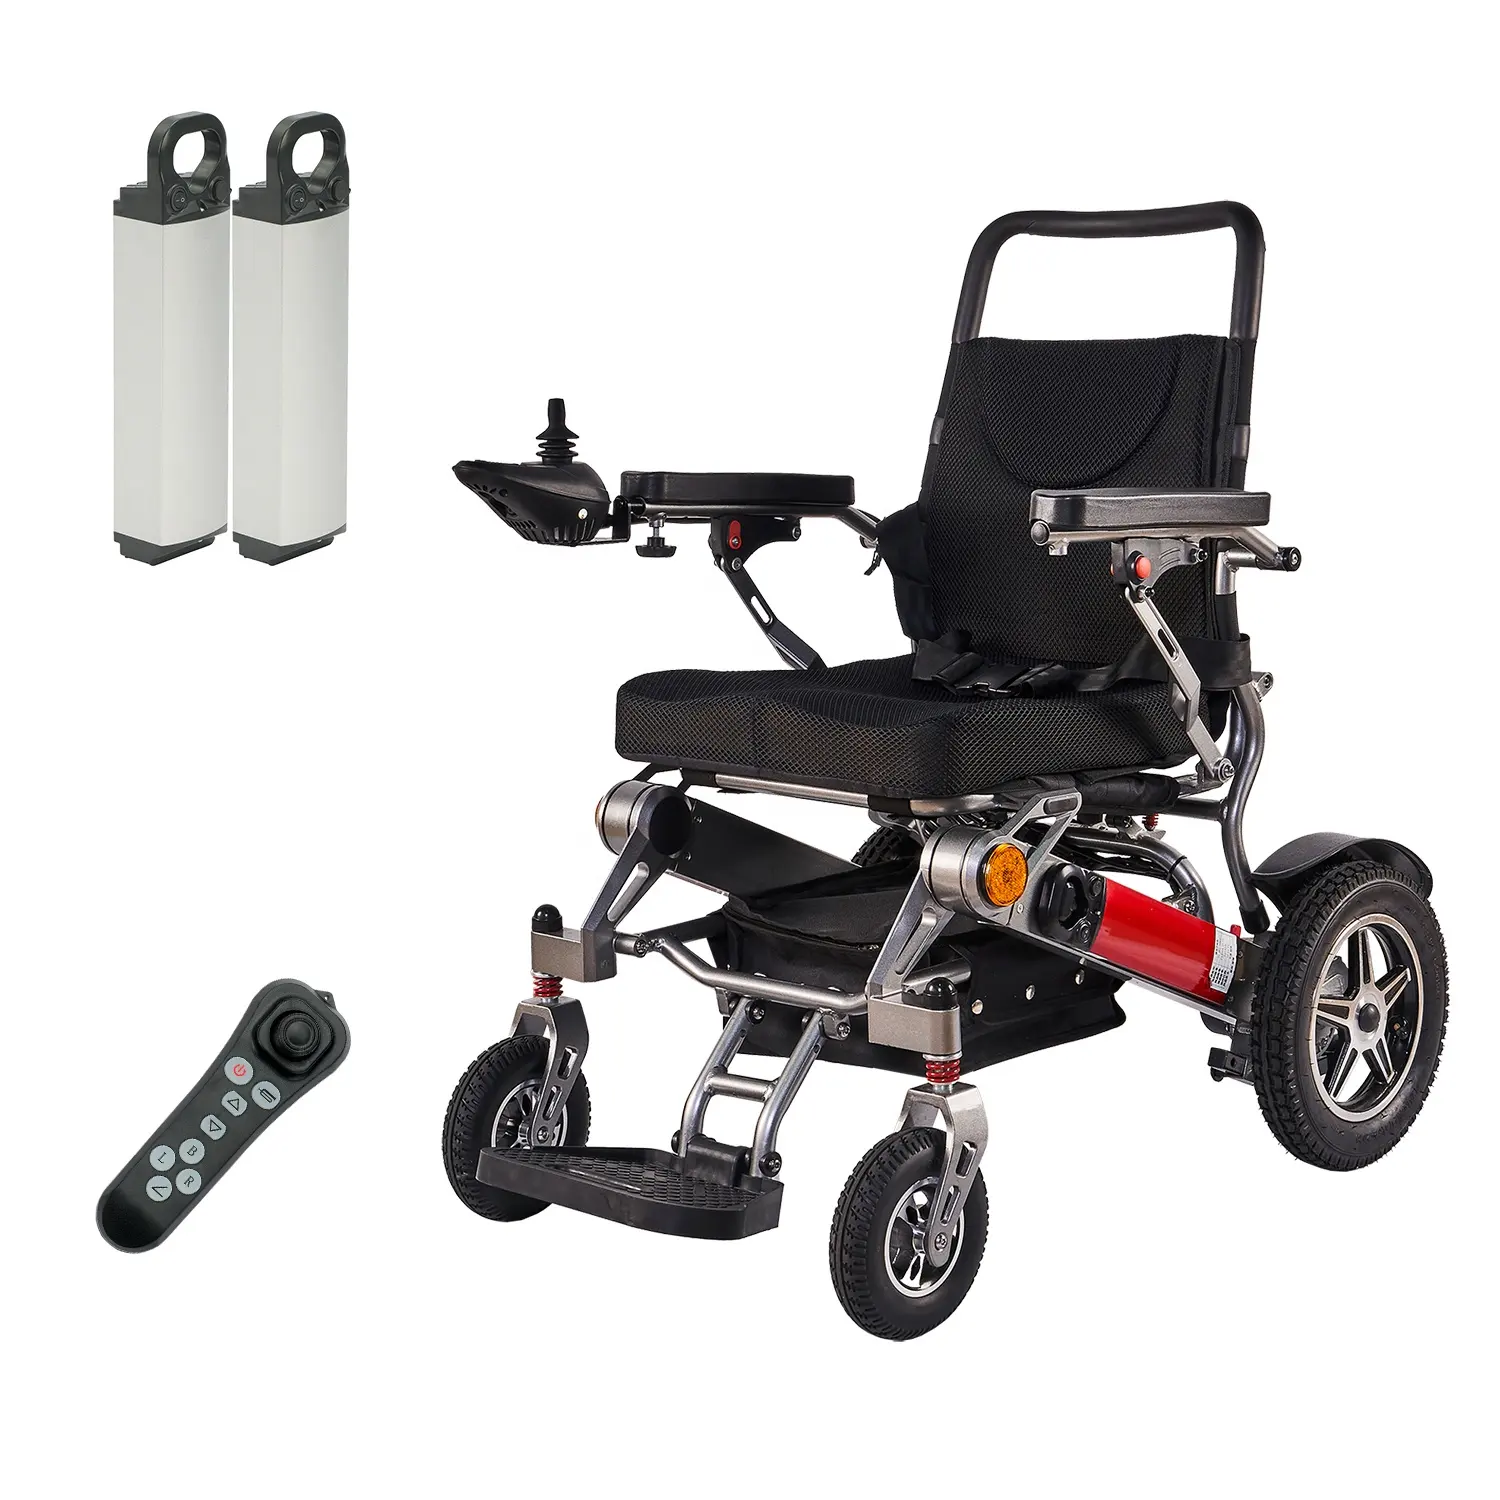 Cheap Foldable Wheelchairs for disabled Aluminum alloy frame electric wheelchair with remote control